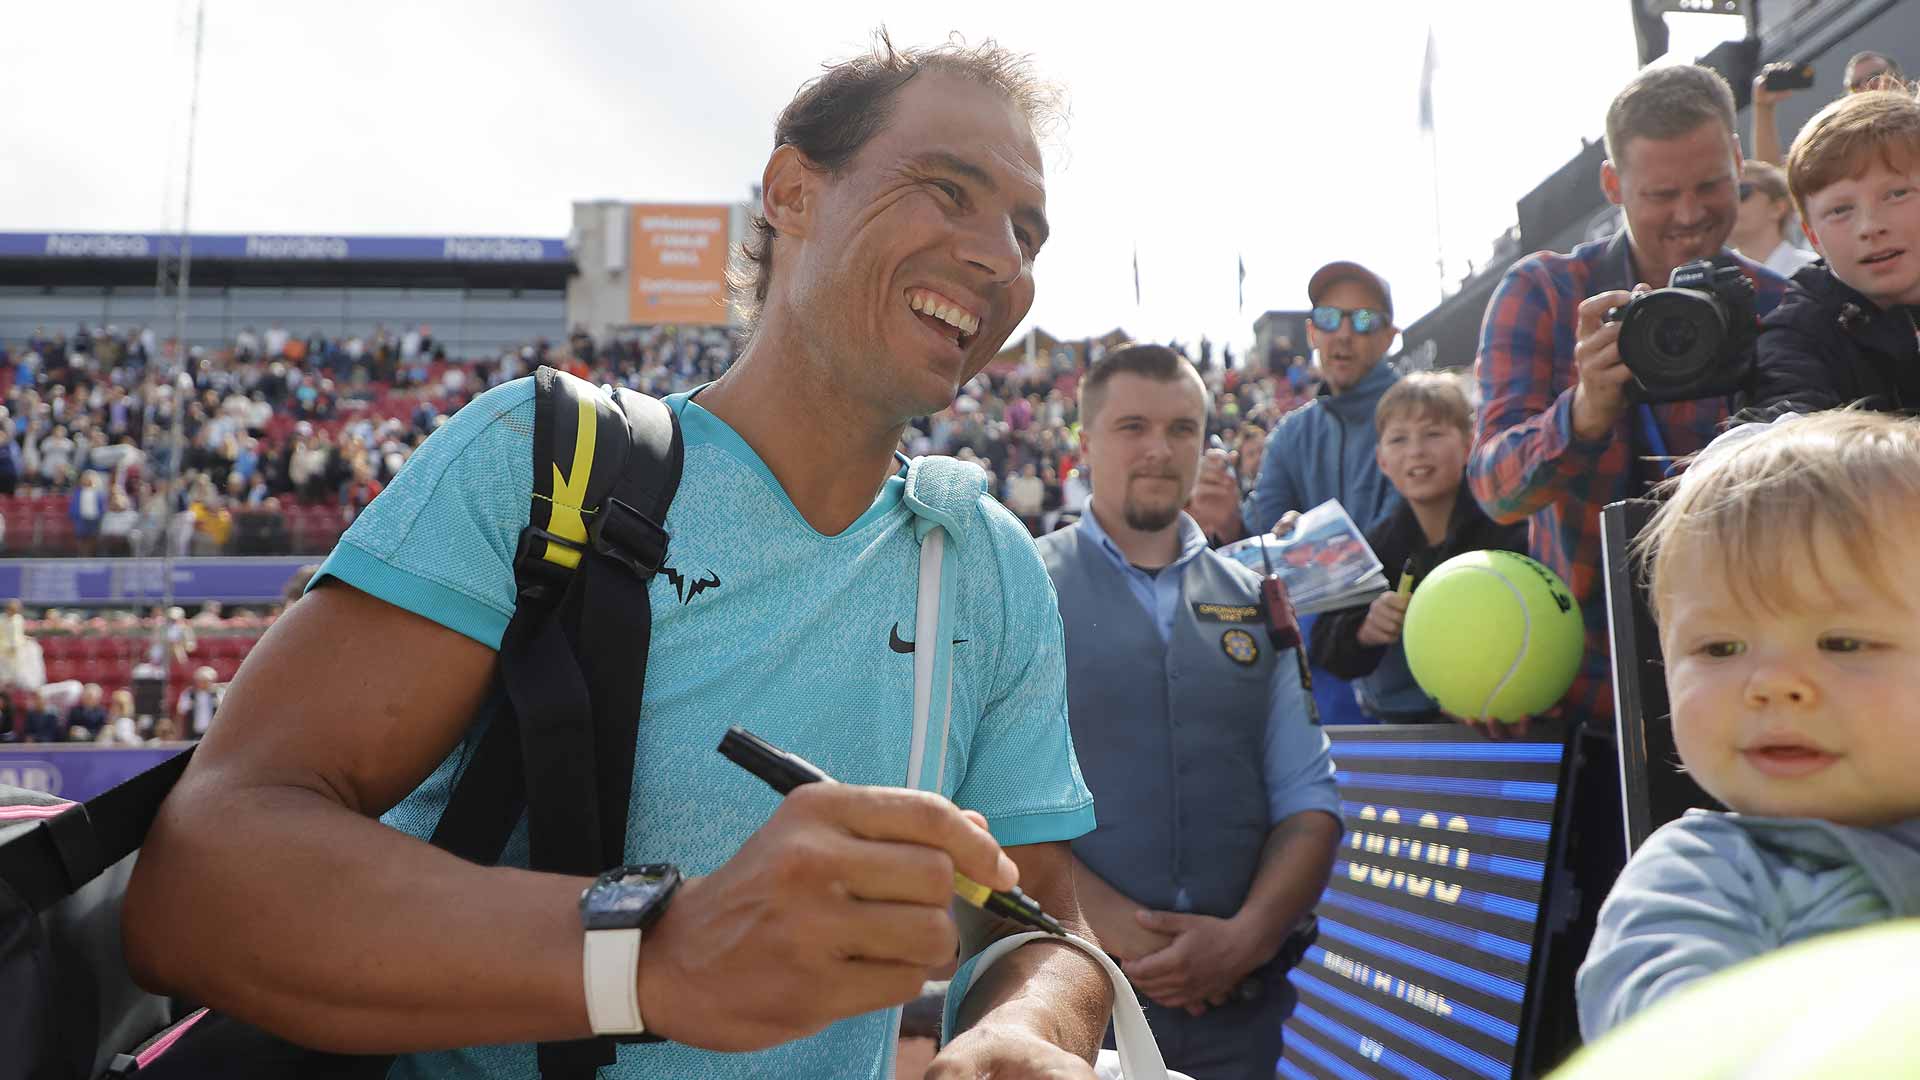 Nadal says Alcaraz 'is going to be one of the best in history'